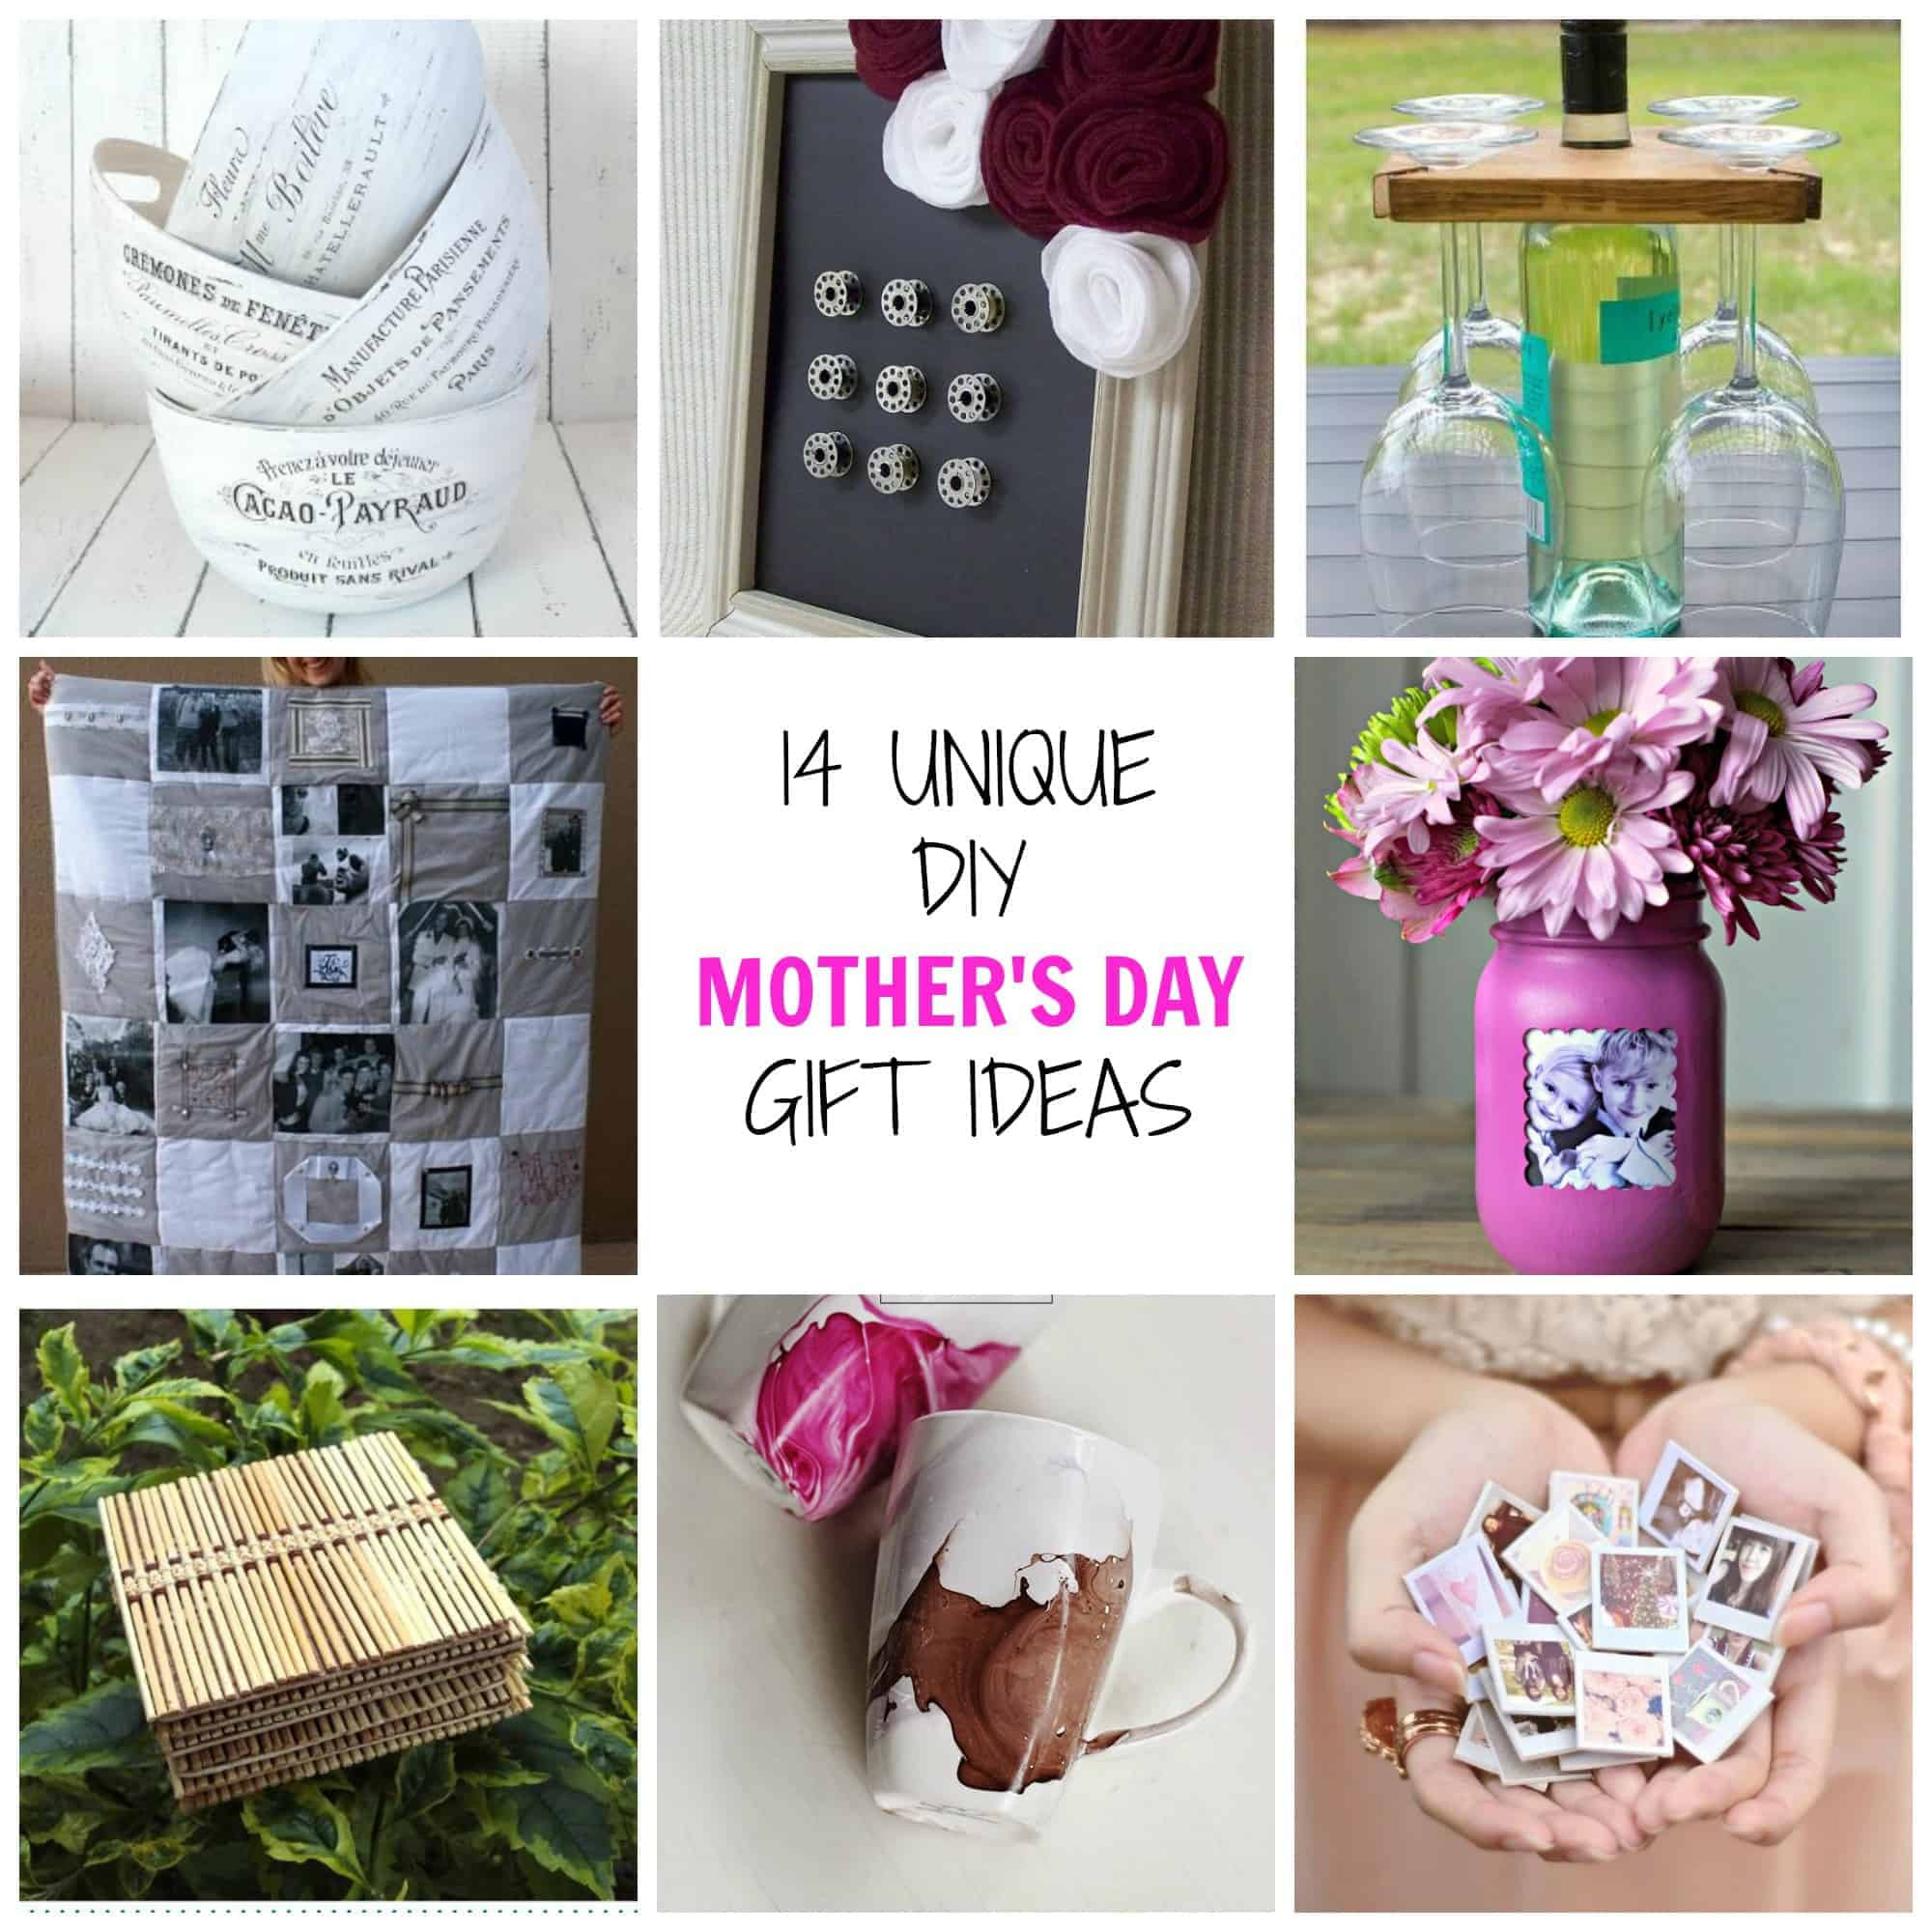 Mother's Day Ideas Diy
 14 Unique DIY Mother s Day Gifts Simplify Create Inspire